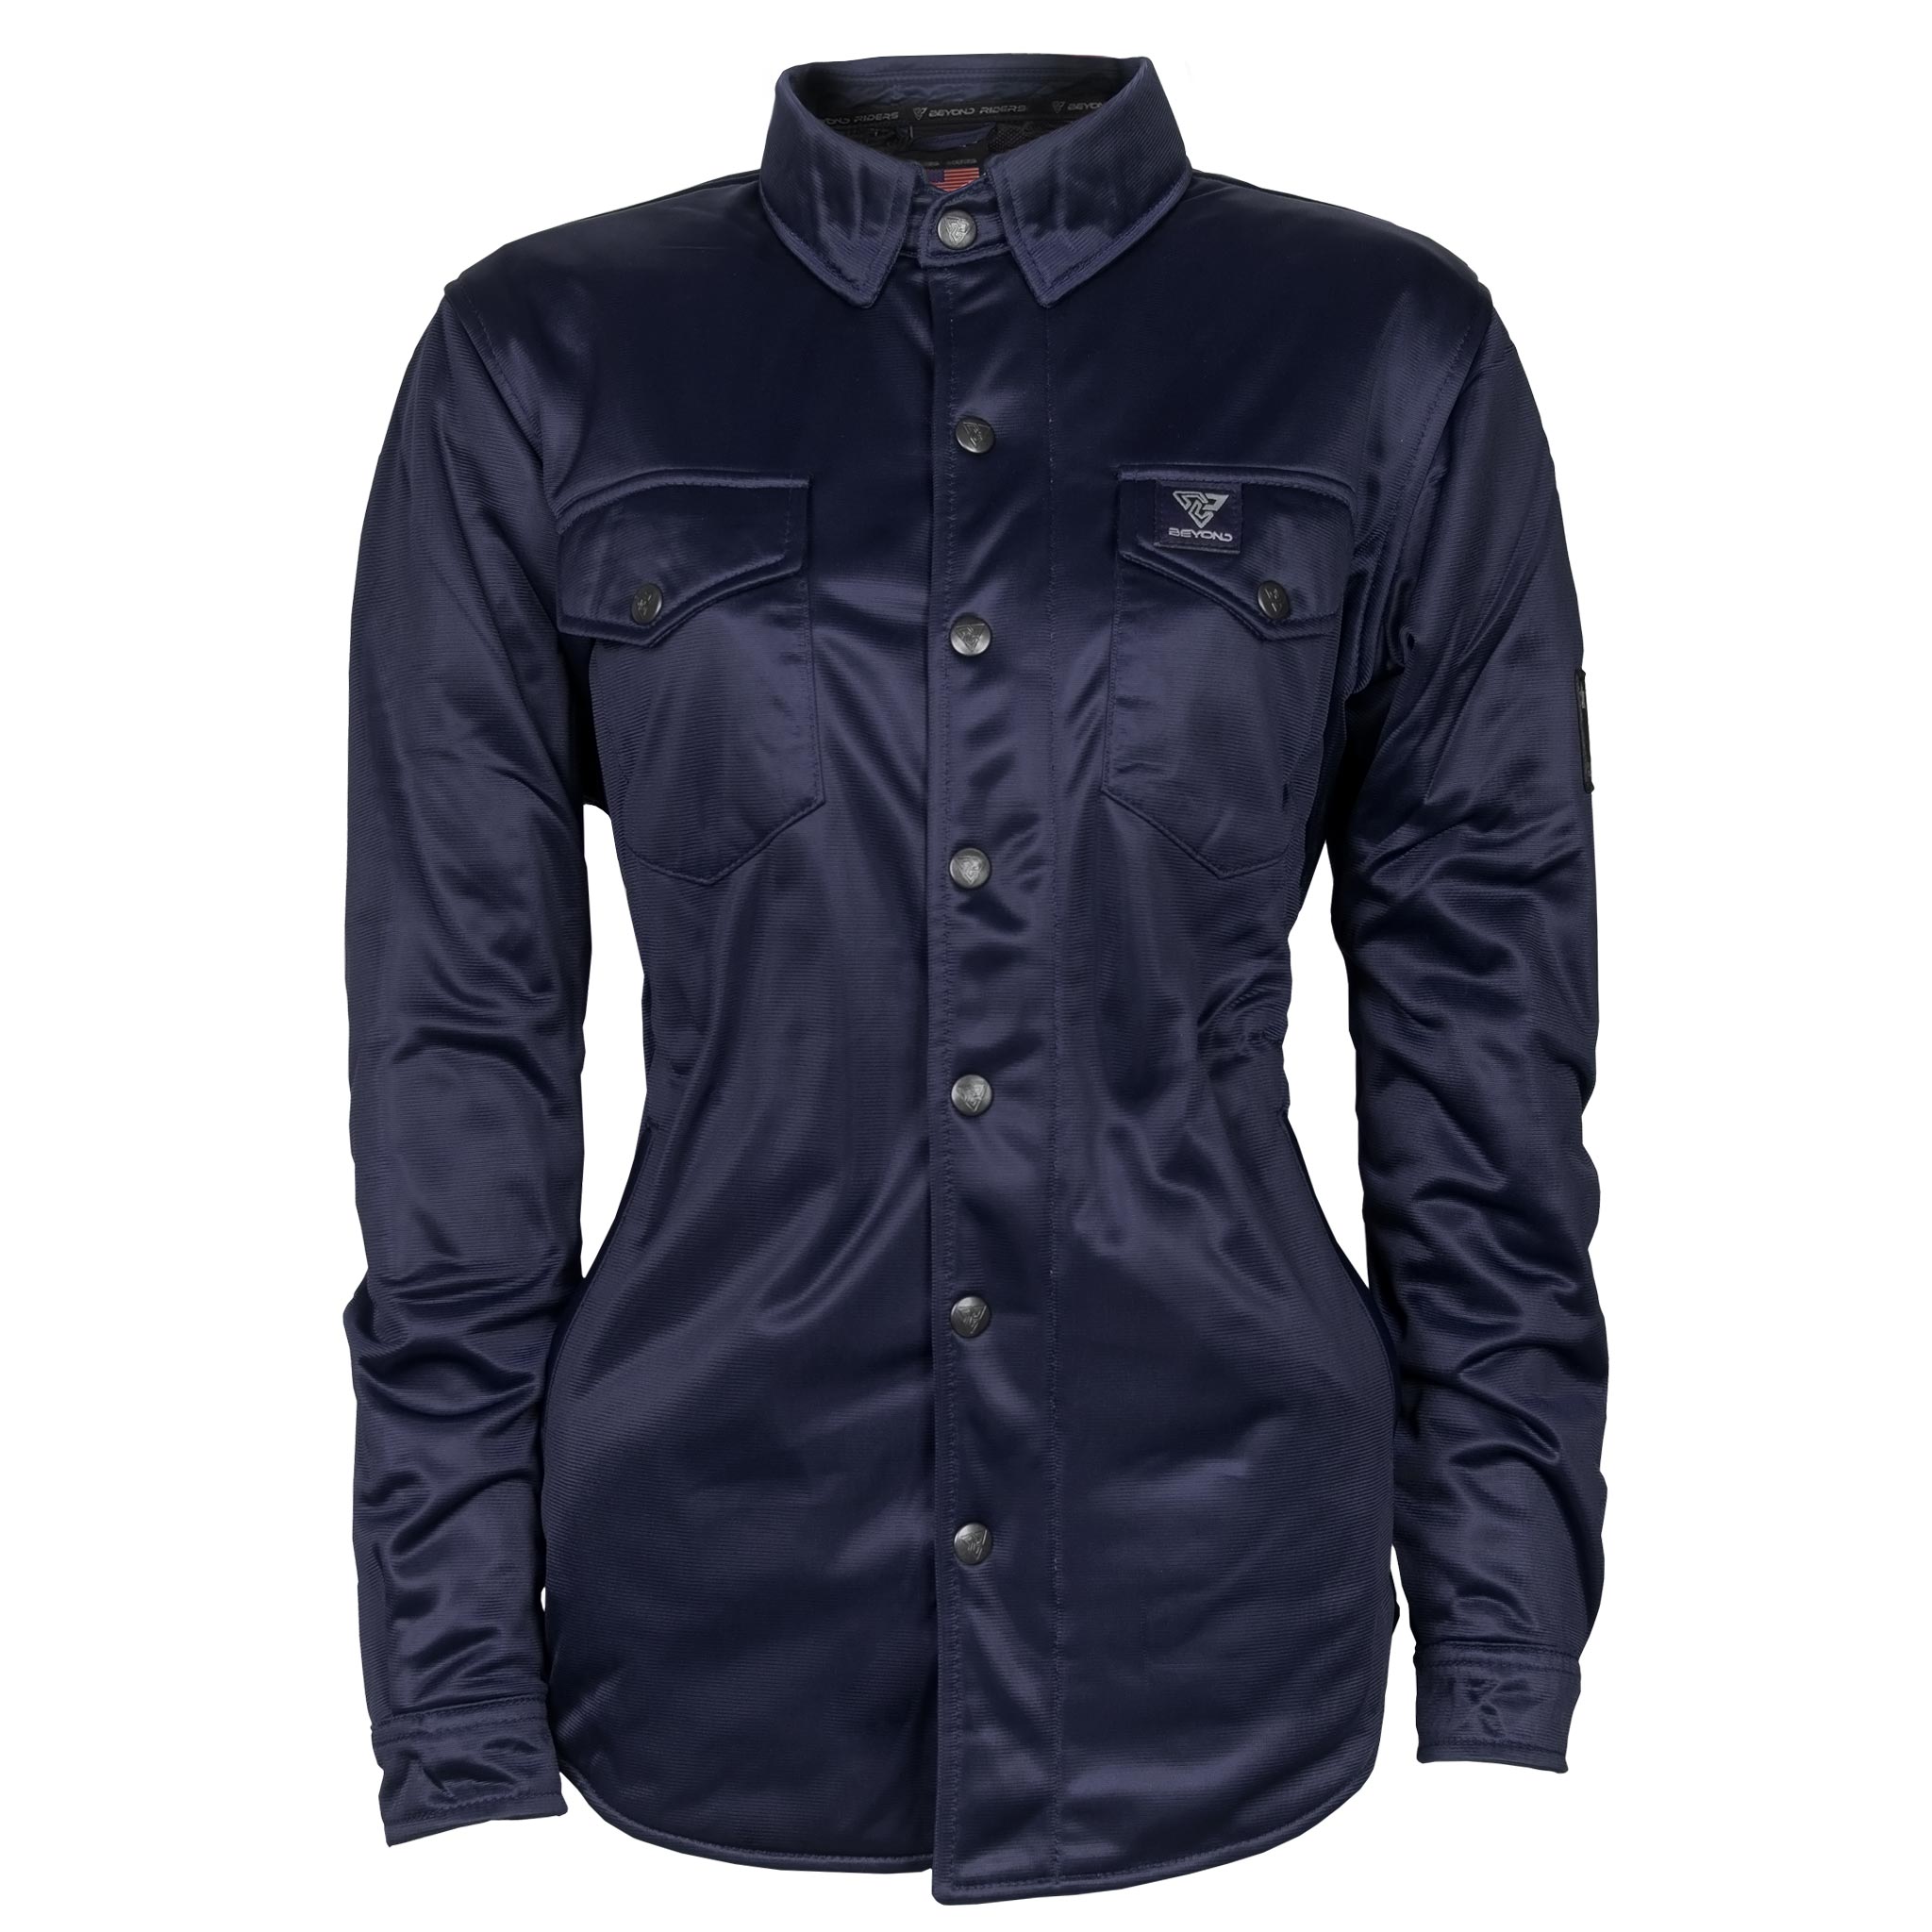 Ultra Protective Shirt for Women - Navy Blue Solid